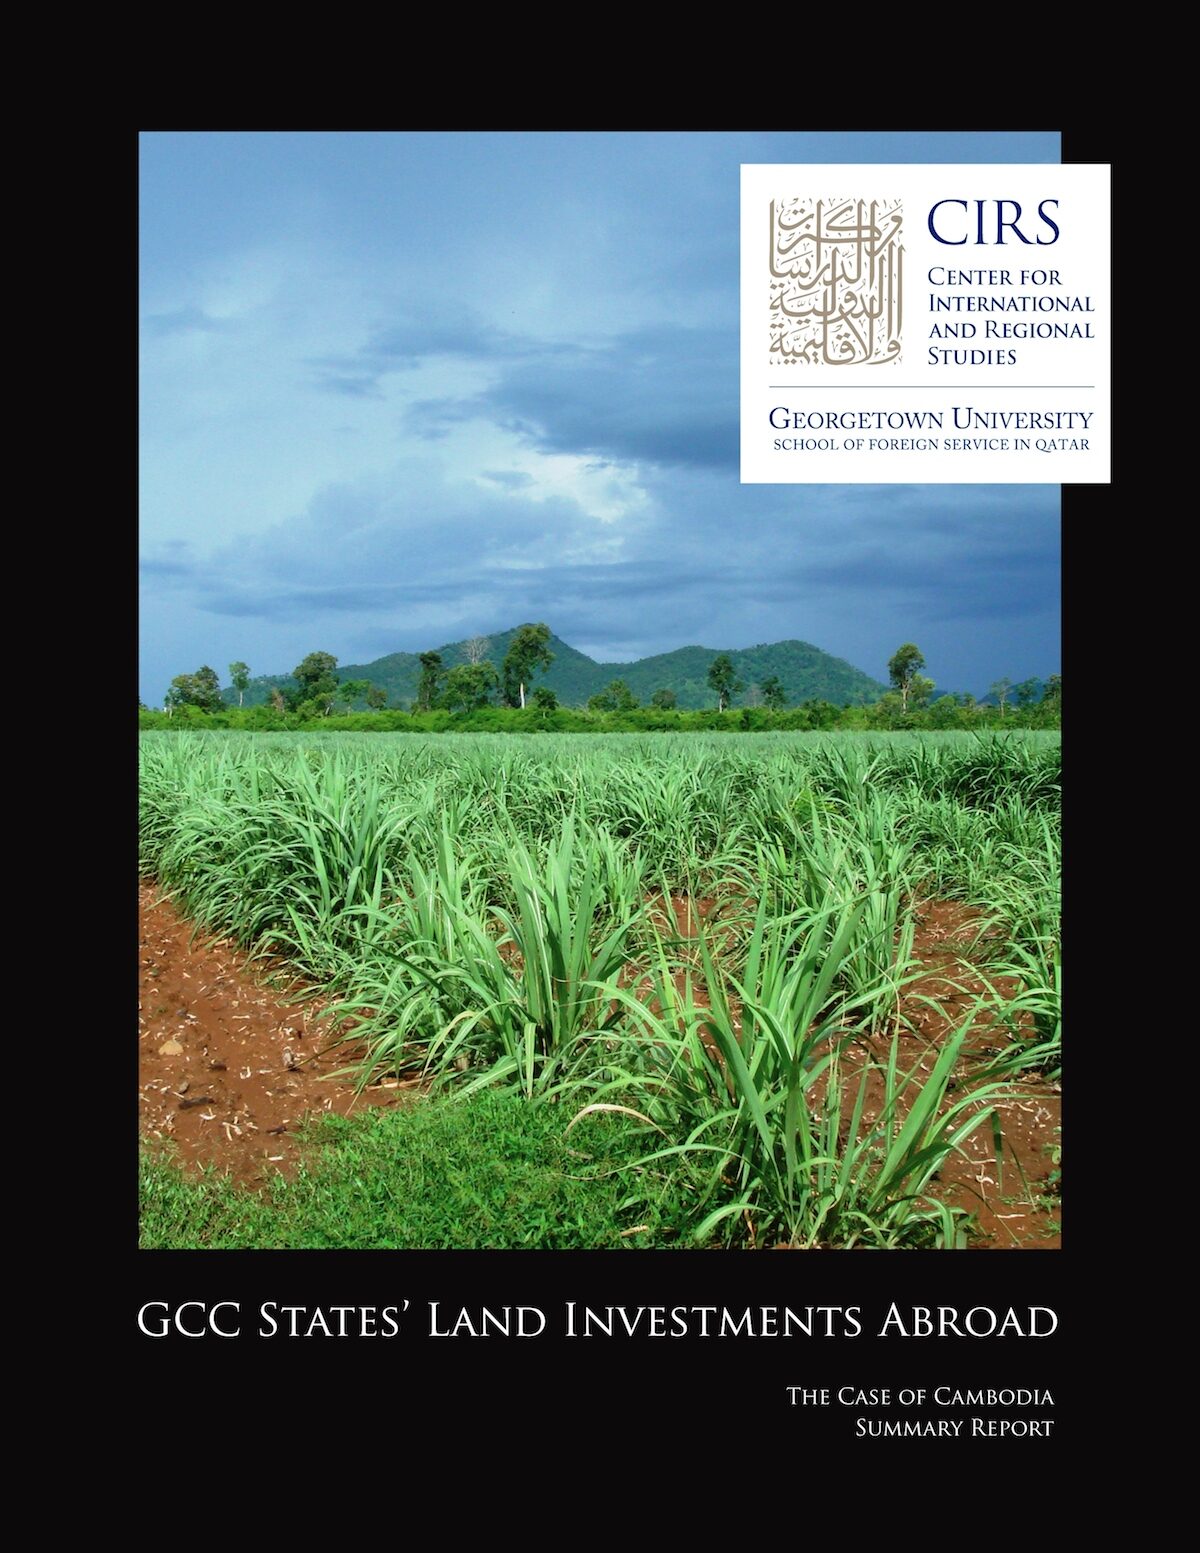 GCC States' Land Investments Abroad: The Case of Cambodia